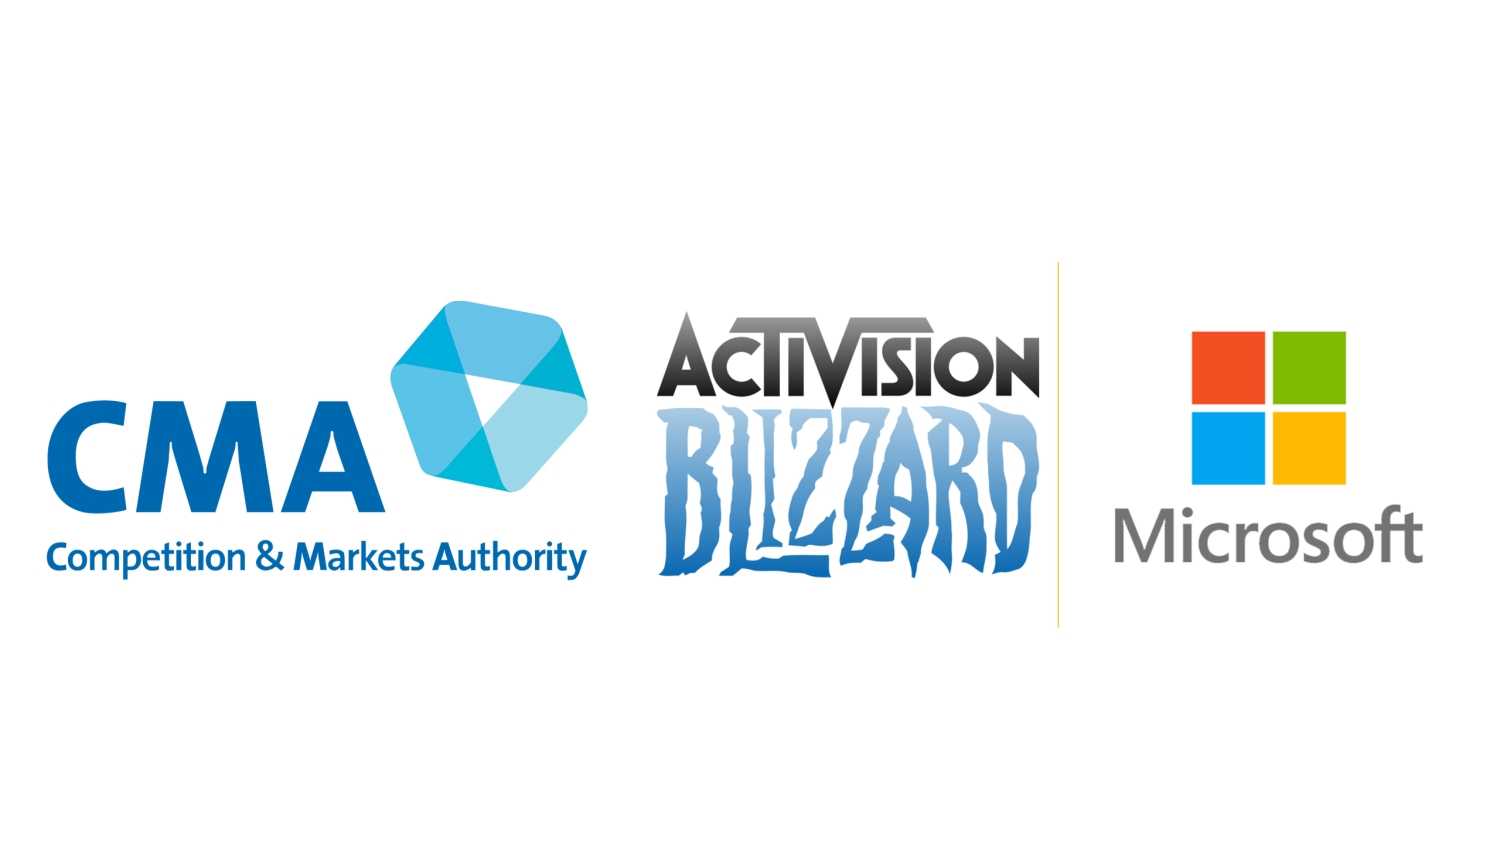 Microsoft's Activision Blizzard acquisition blocked by UK regulators - The  Verge